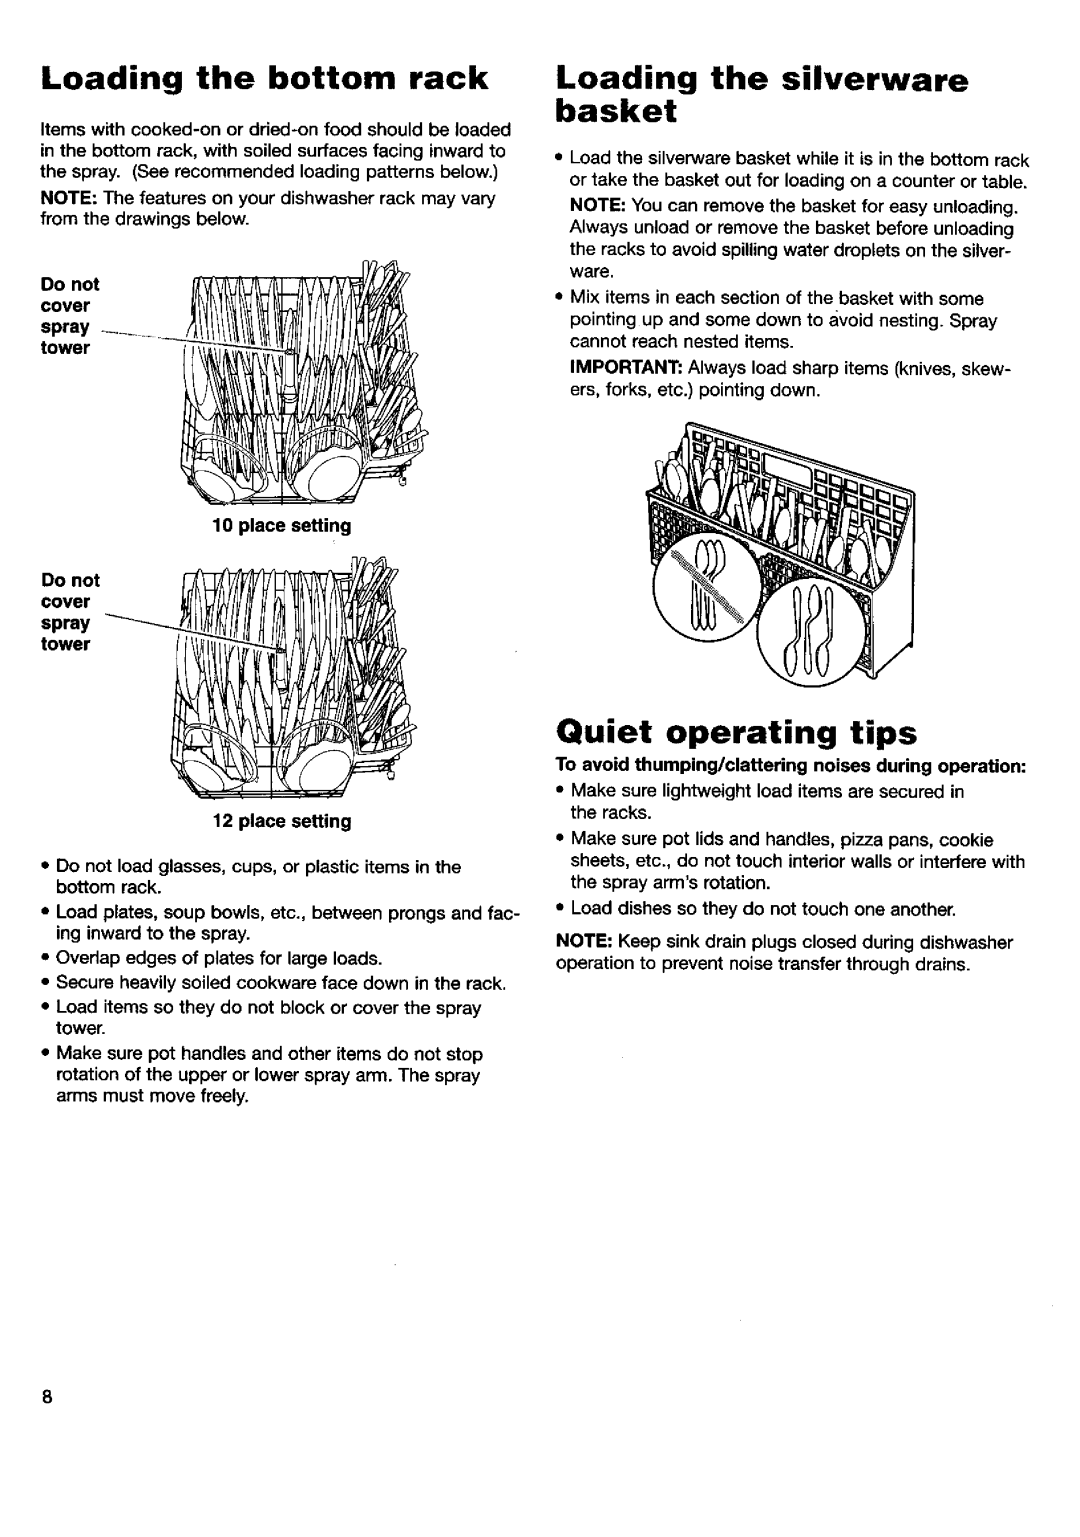 Kenmore 15595, 15592 manual Quiet operating tips, Loading the bottom rack, Loading the silverware basket 